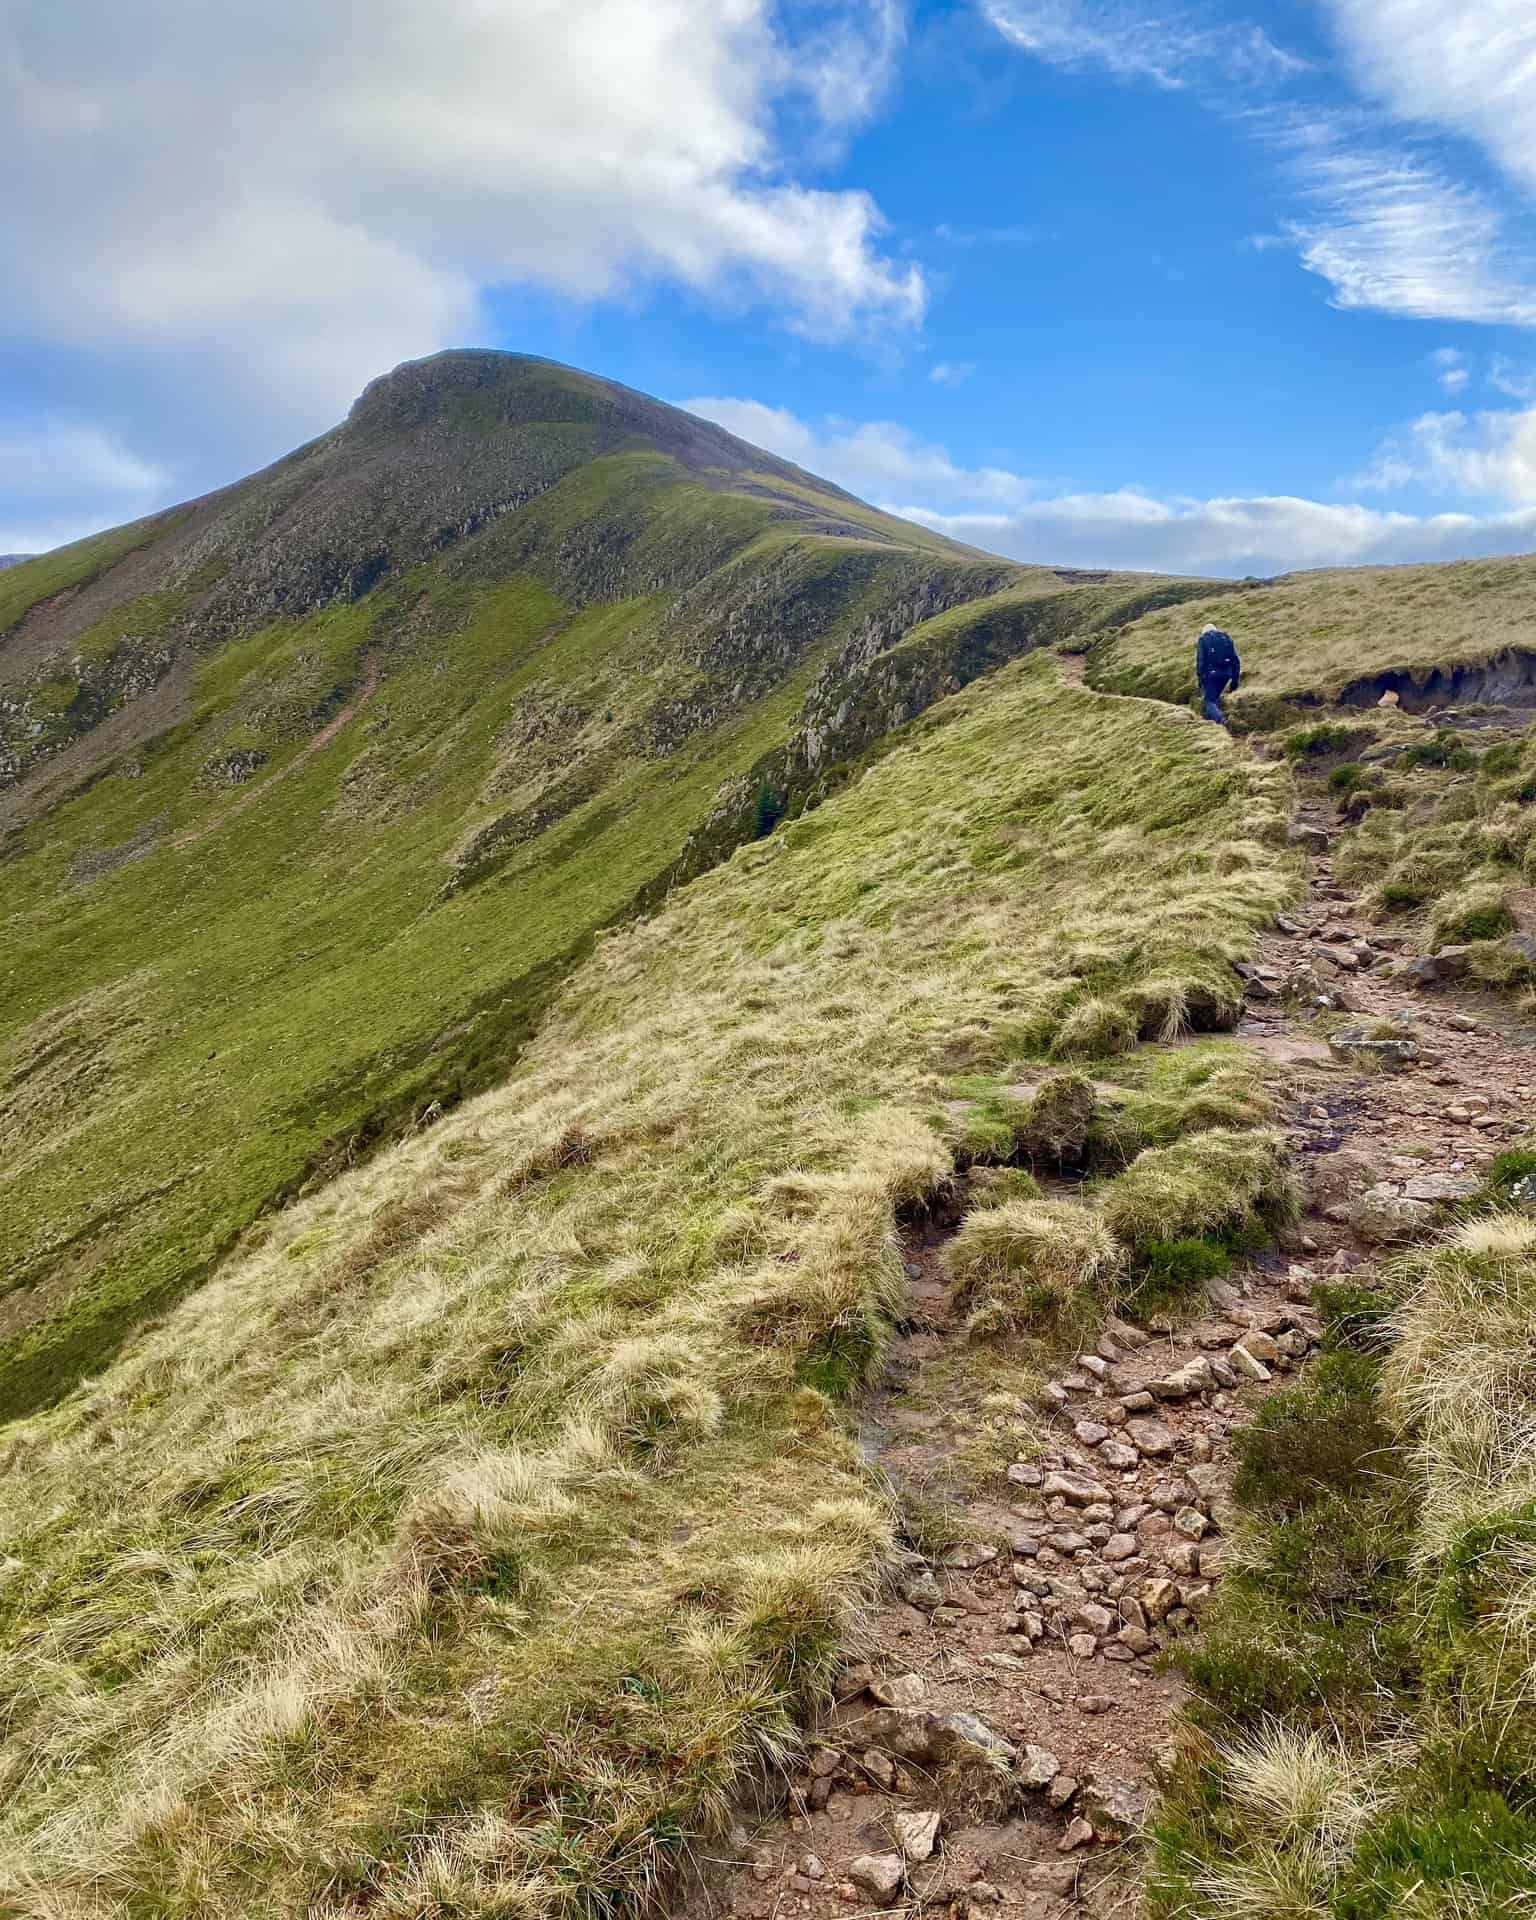 The start of the climb to the top of Red Pike from Lingcomb Edge.